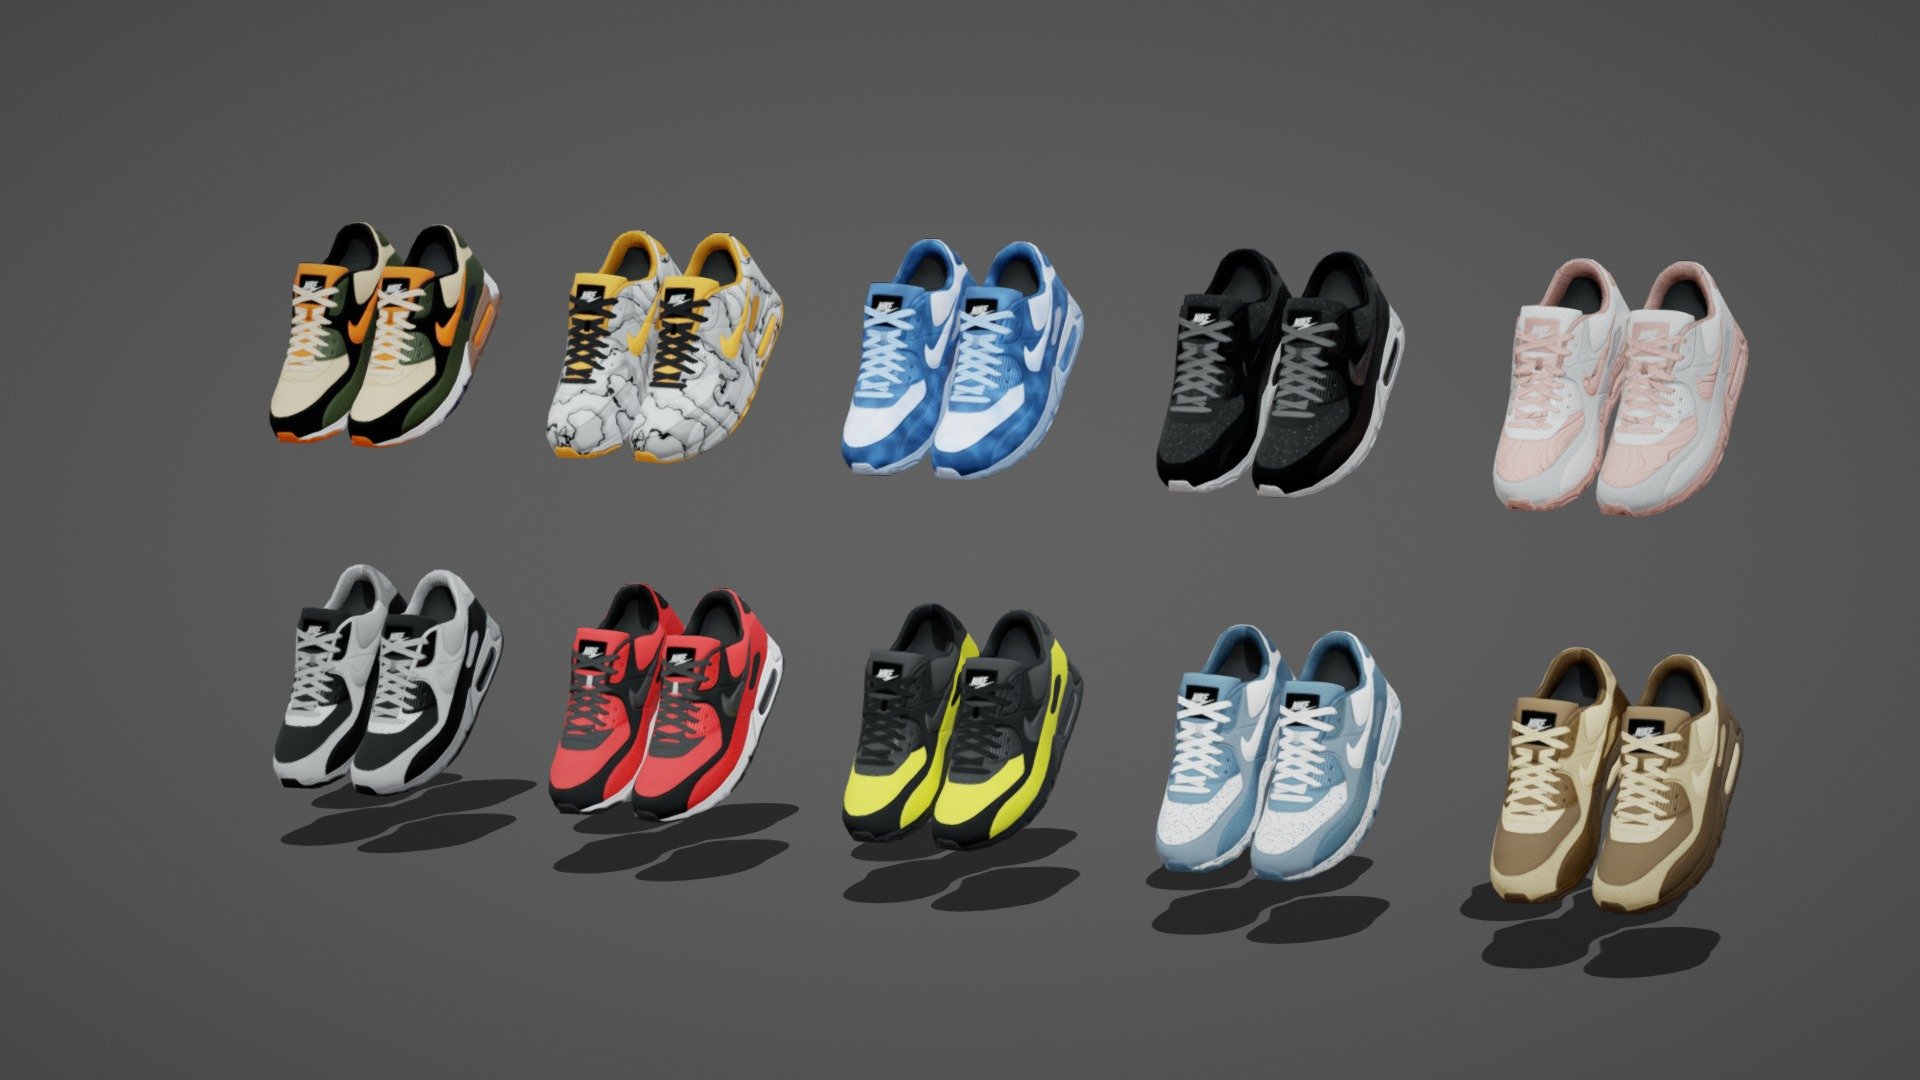 Airmax NIKE Shoes model in very low poly style.

All 10 shoes GLB File size is around 1500 kb

Model :   Poly Count - 6760 ( 676 per pair )

Textures  :  1k resolution

All shoes use same Metallic, Roughness and normal map

Diffuse map is different for all shoes

All seperate Low poly shoes link as below:

1 ) https://skfb.ly/oQsLn

2 ) https://skfb.ly/oQsN7

3 ) https://skfb.ly/oQsOv

4 ) https://skfb.ly/oQsOA

5 ) https://skfb.ly/oQsOI

6 ) https://skfb.ly/oQsOO

7 ) https://skfb.ly/oQsOS

8 ) https://skfb.ly/oQsP6

9 ) https://skfb.ly/oQsPt

10 ) https://skfb.ly/oQsPy

Best suitable for Metaverse projects.

Highpoly Model https://skfb.ly/oKoR9 - Airmax - Nike Low Poly - Pack of 10 - Buy Royalty Free 3D model by 5th Dimension (@5th-Dimension) 3d model